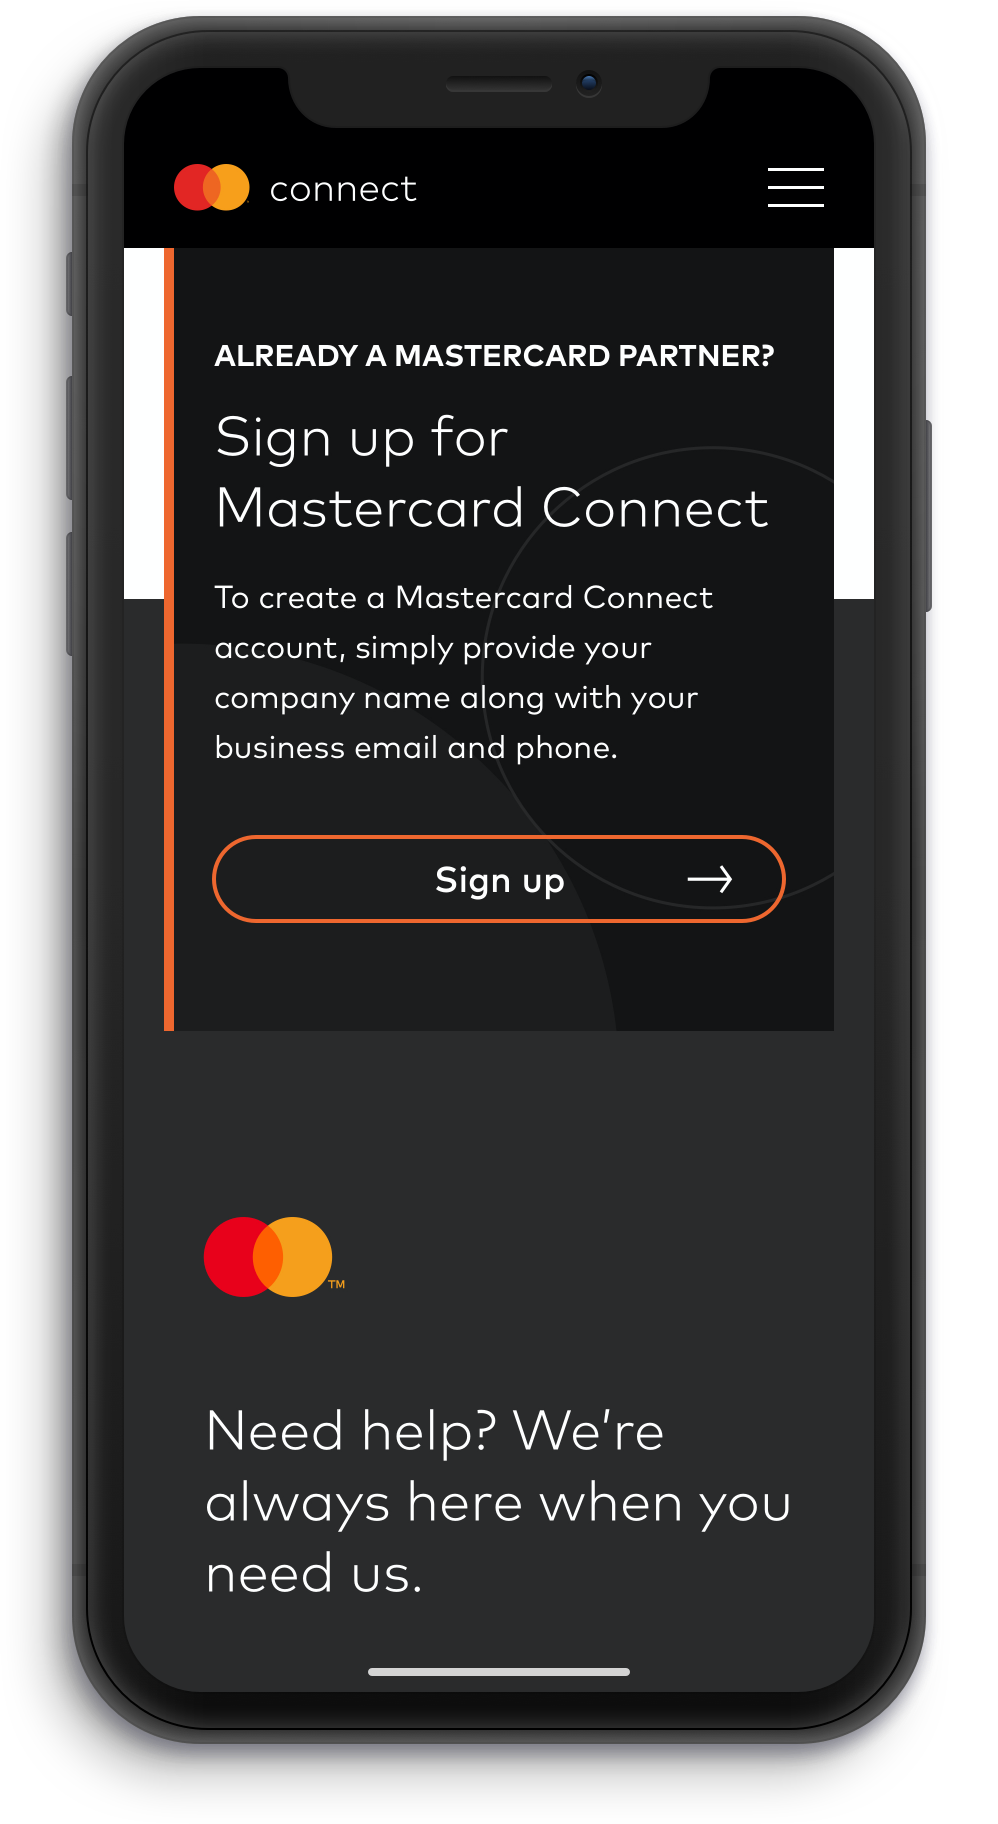 Mastercard Connect displayed on iPhone screen